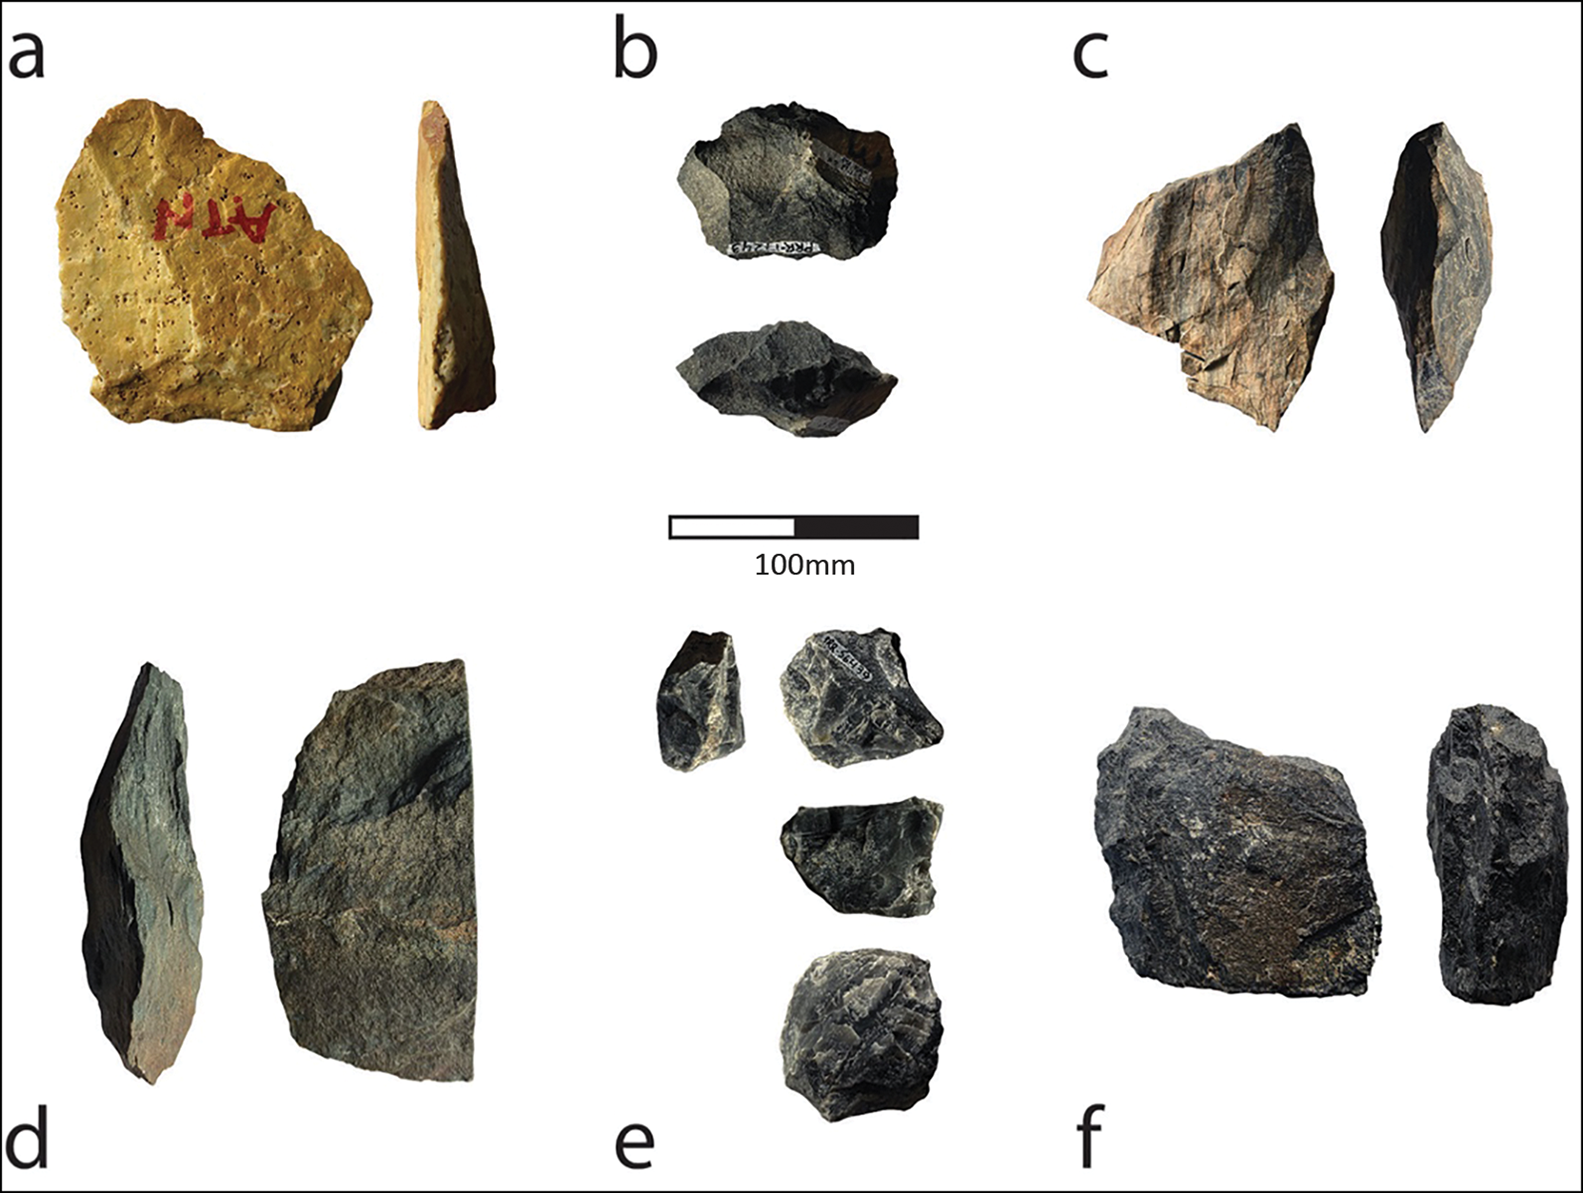 2-Million-Year-Old Stone Tools Unearthed in Tanzania, Archaeology,  Paleoanthropology